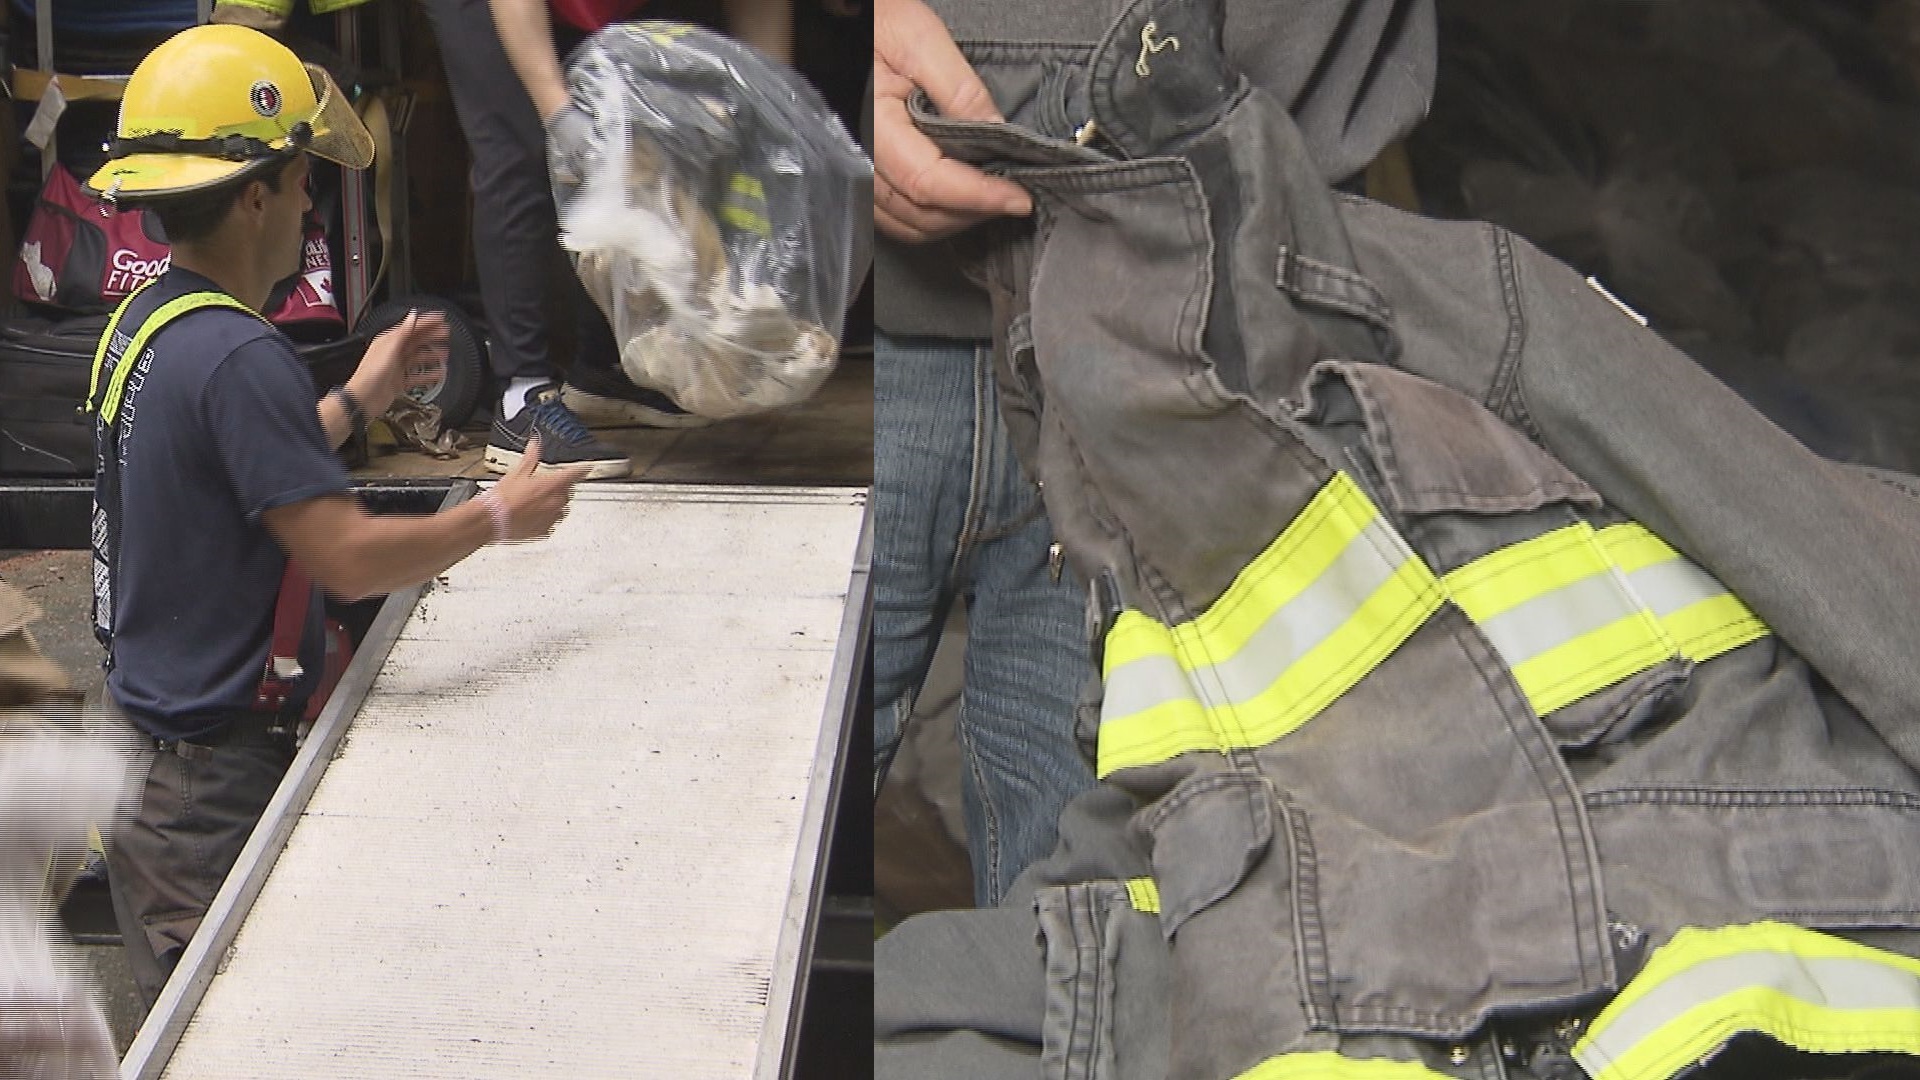 Decommissioned firefighting gear from Canada headed to departments overseas